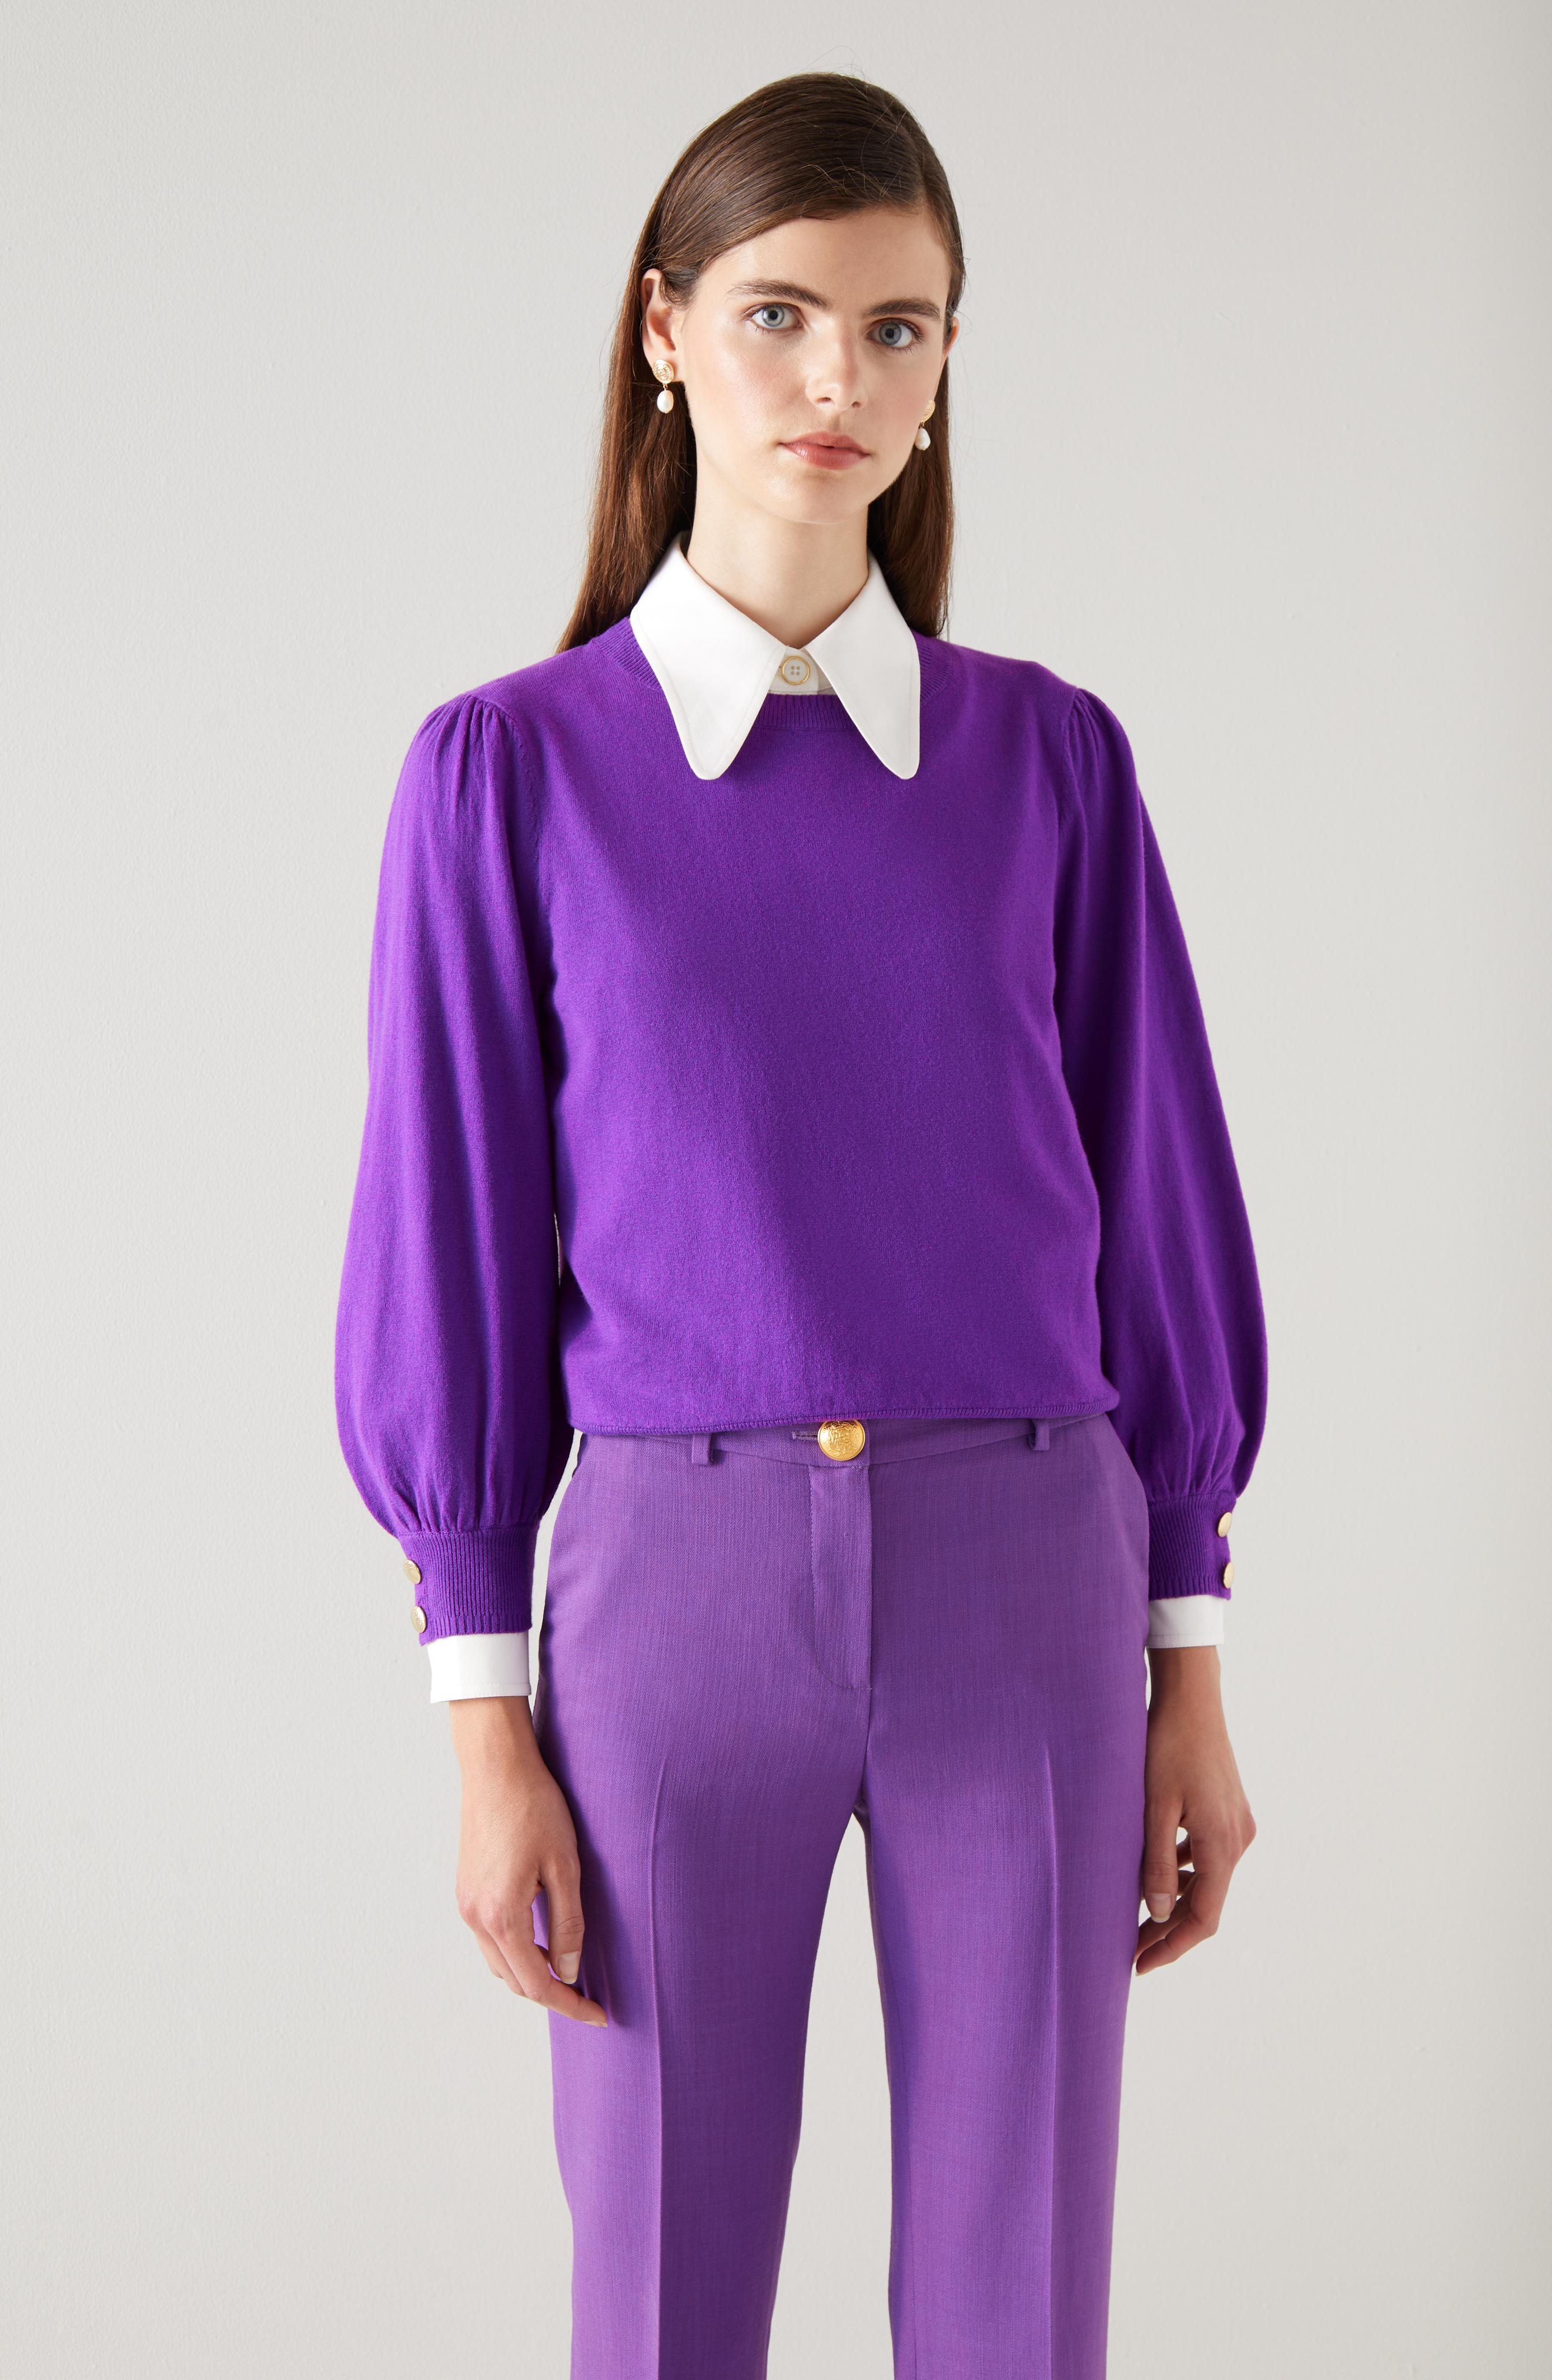 L.K.Bennett Diana Purple Cotton and Sustainably Sourced Merino Jumper, Violet